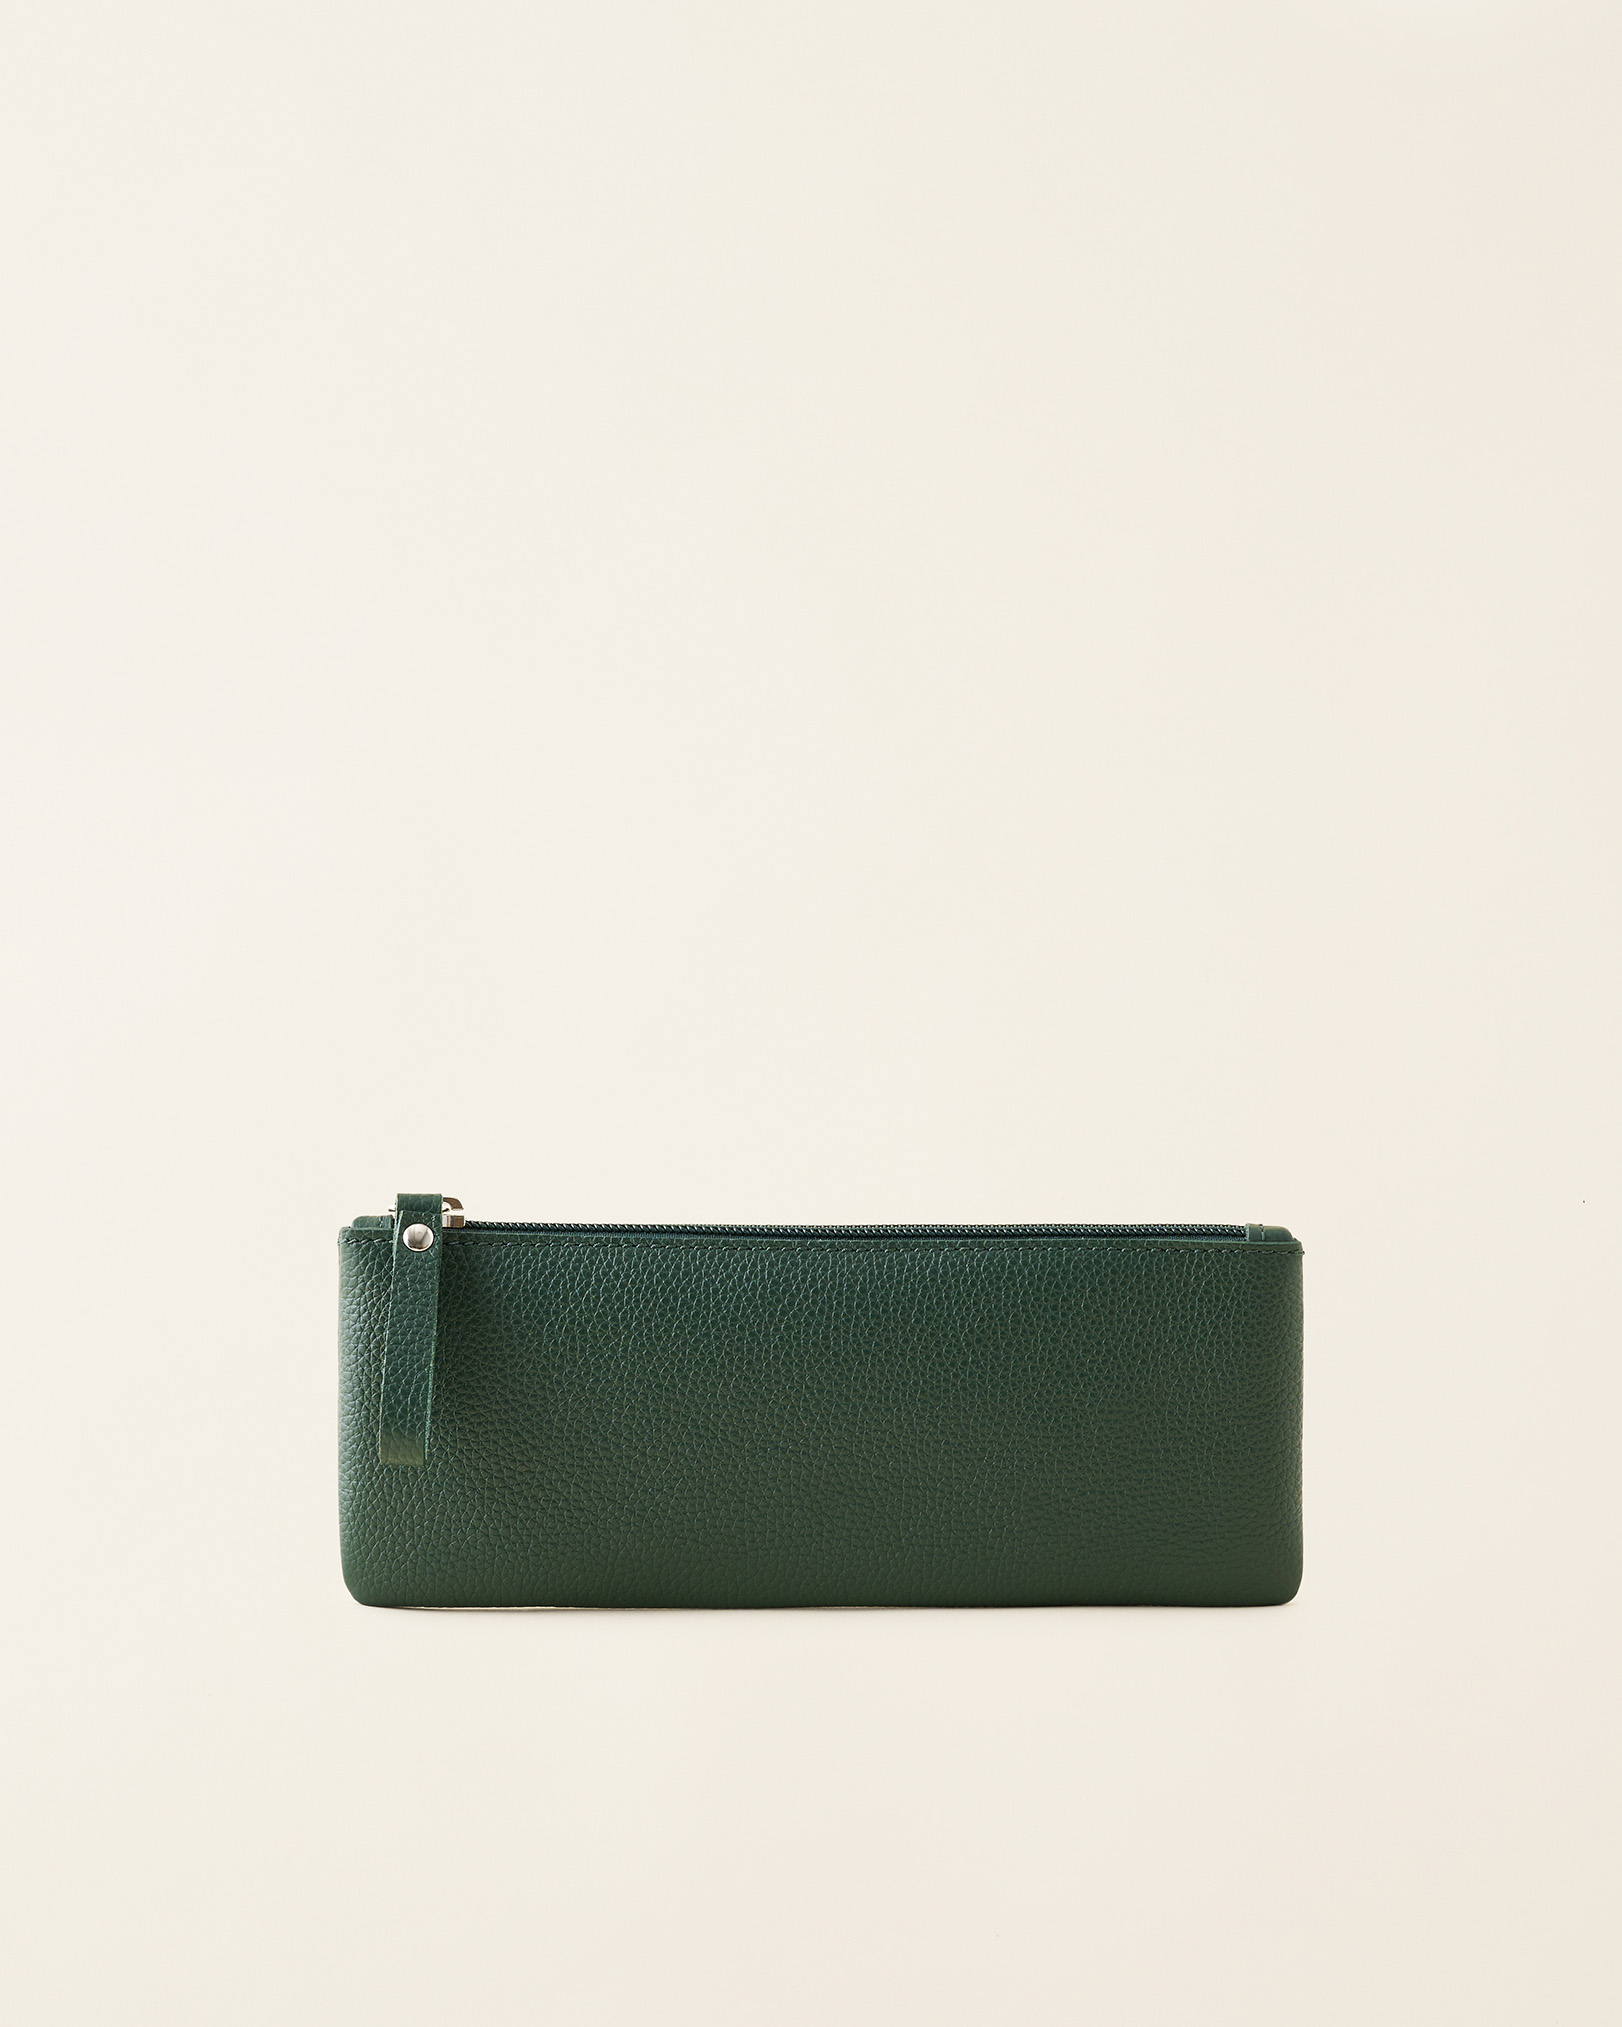 Roots Pencil Case Cervino in Forest Green